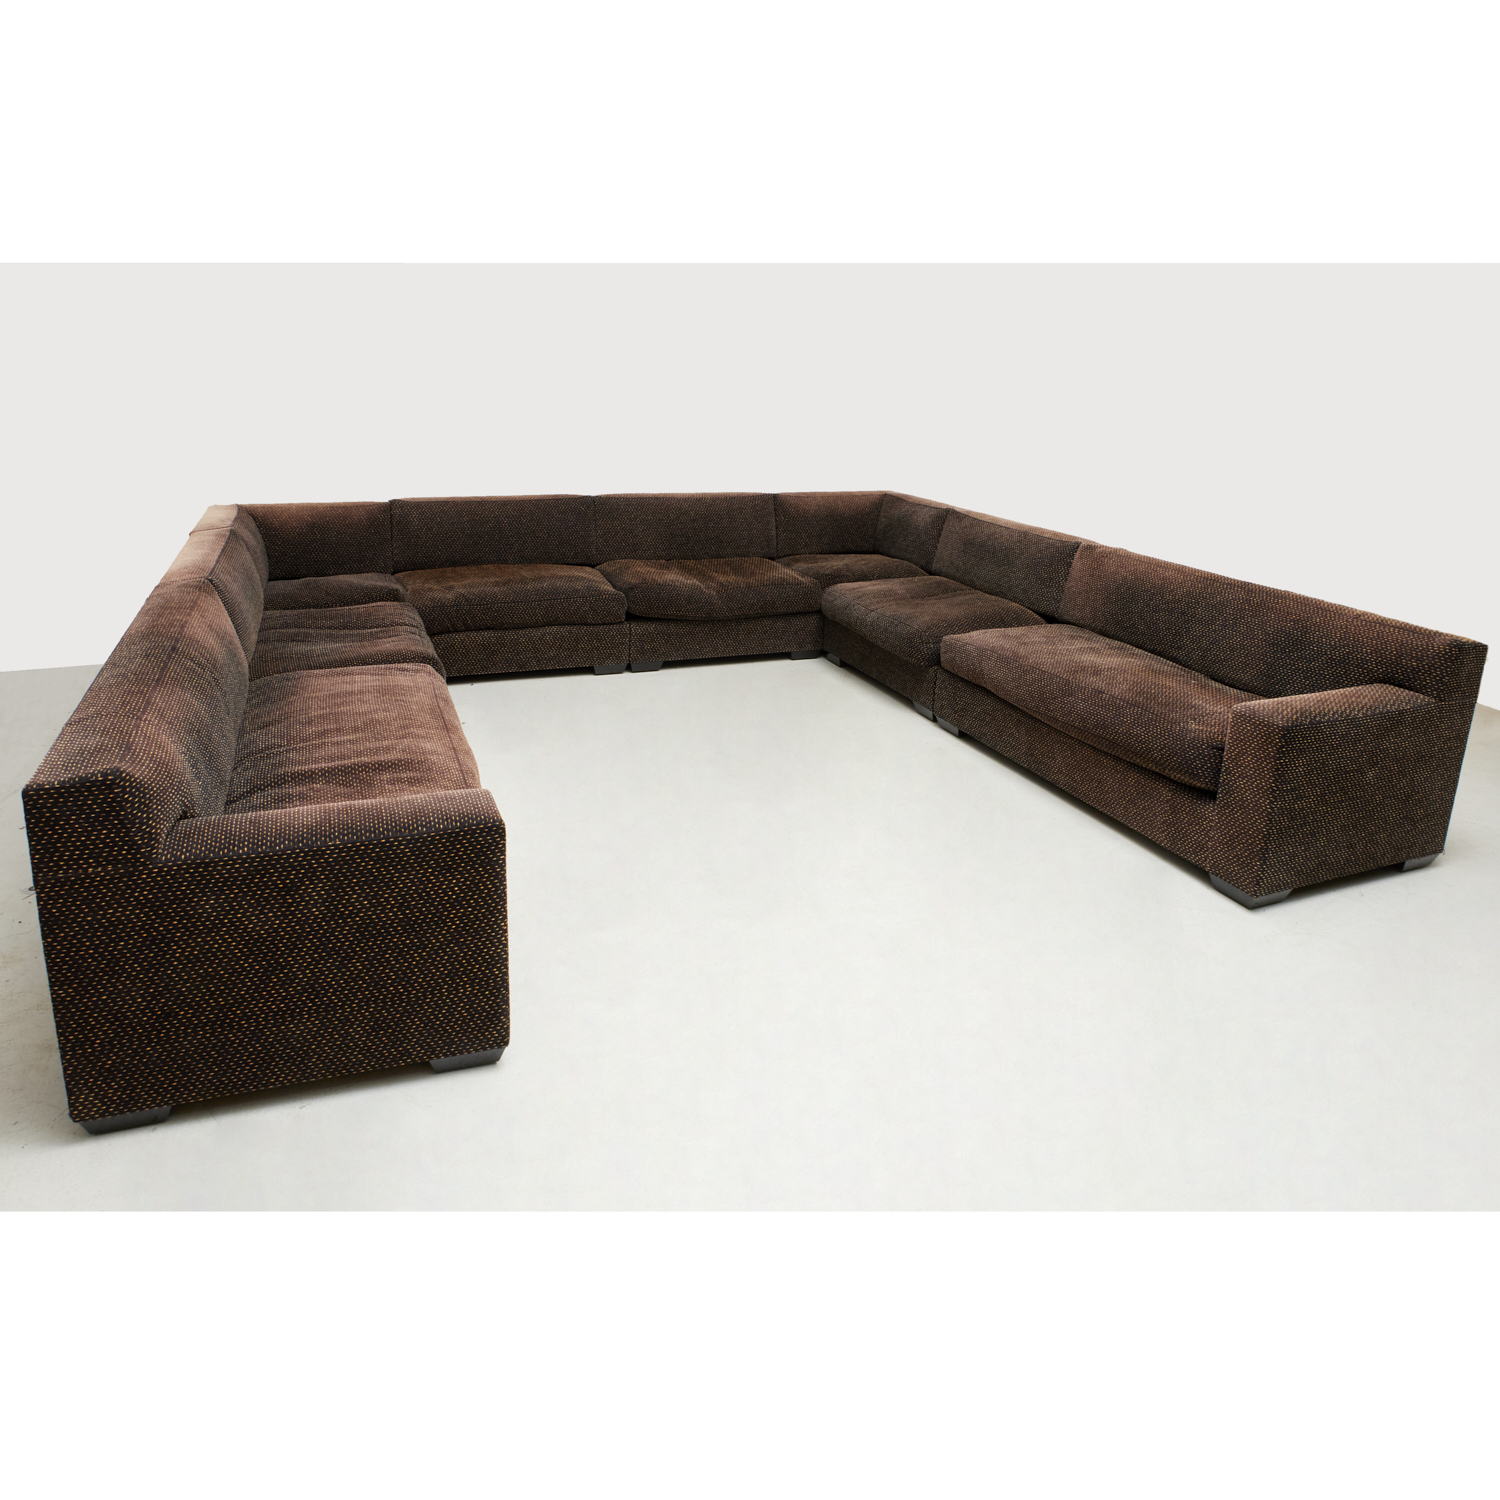 JM FRANK STYLE, LARGE SECTIONAL